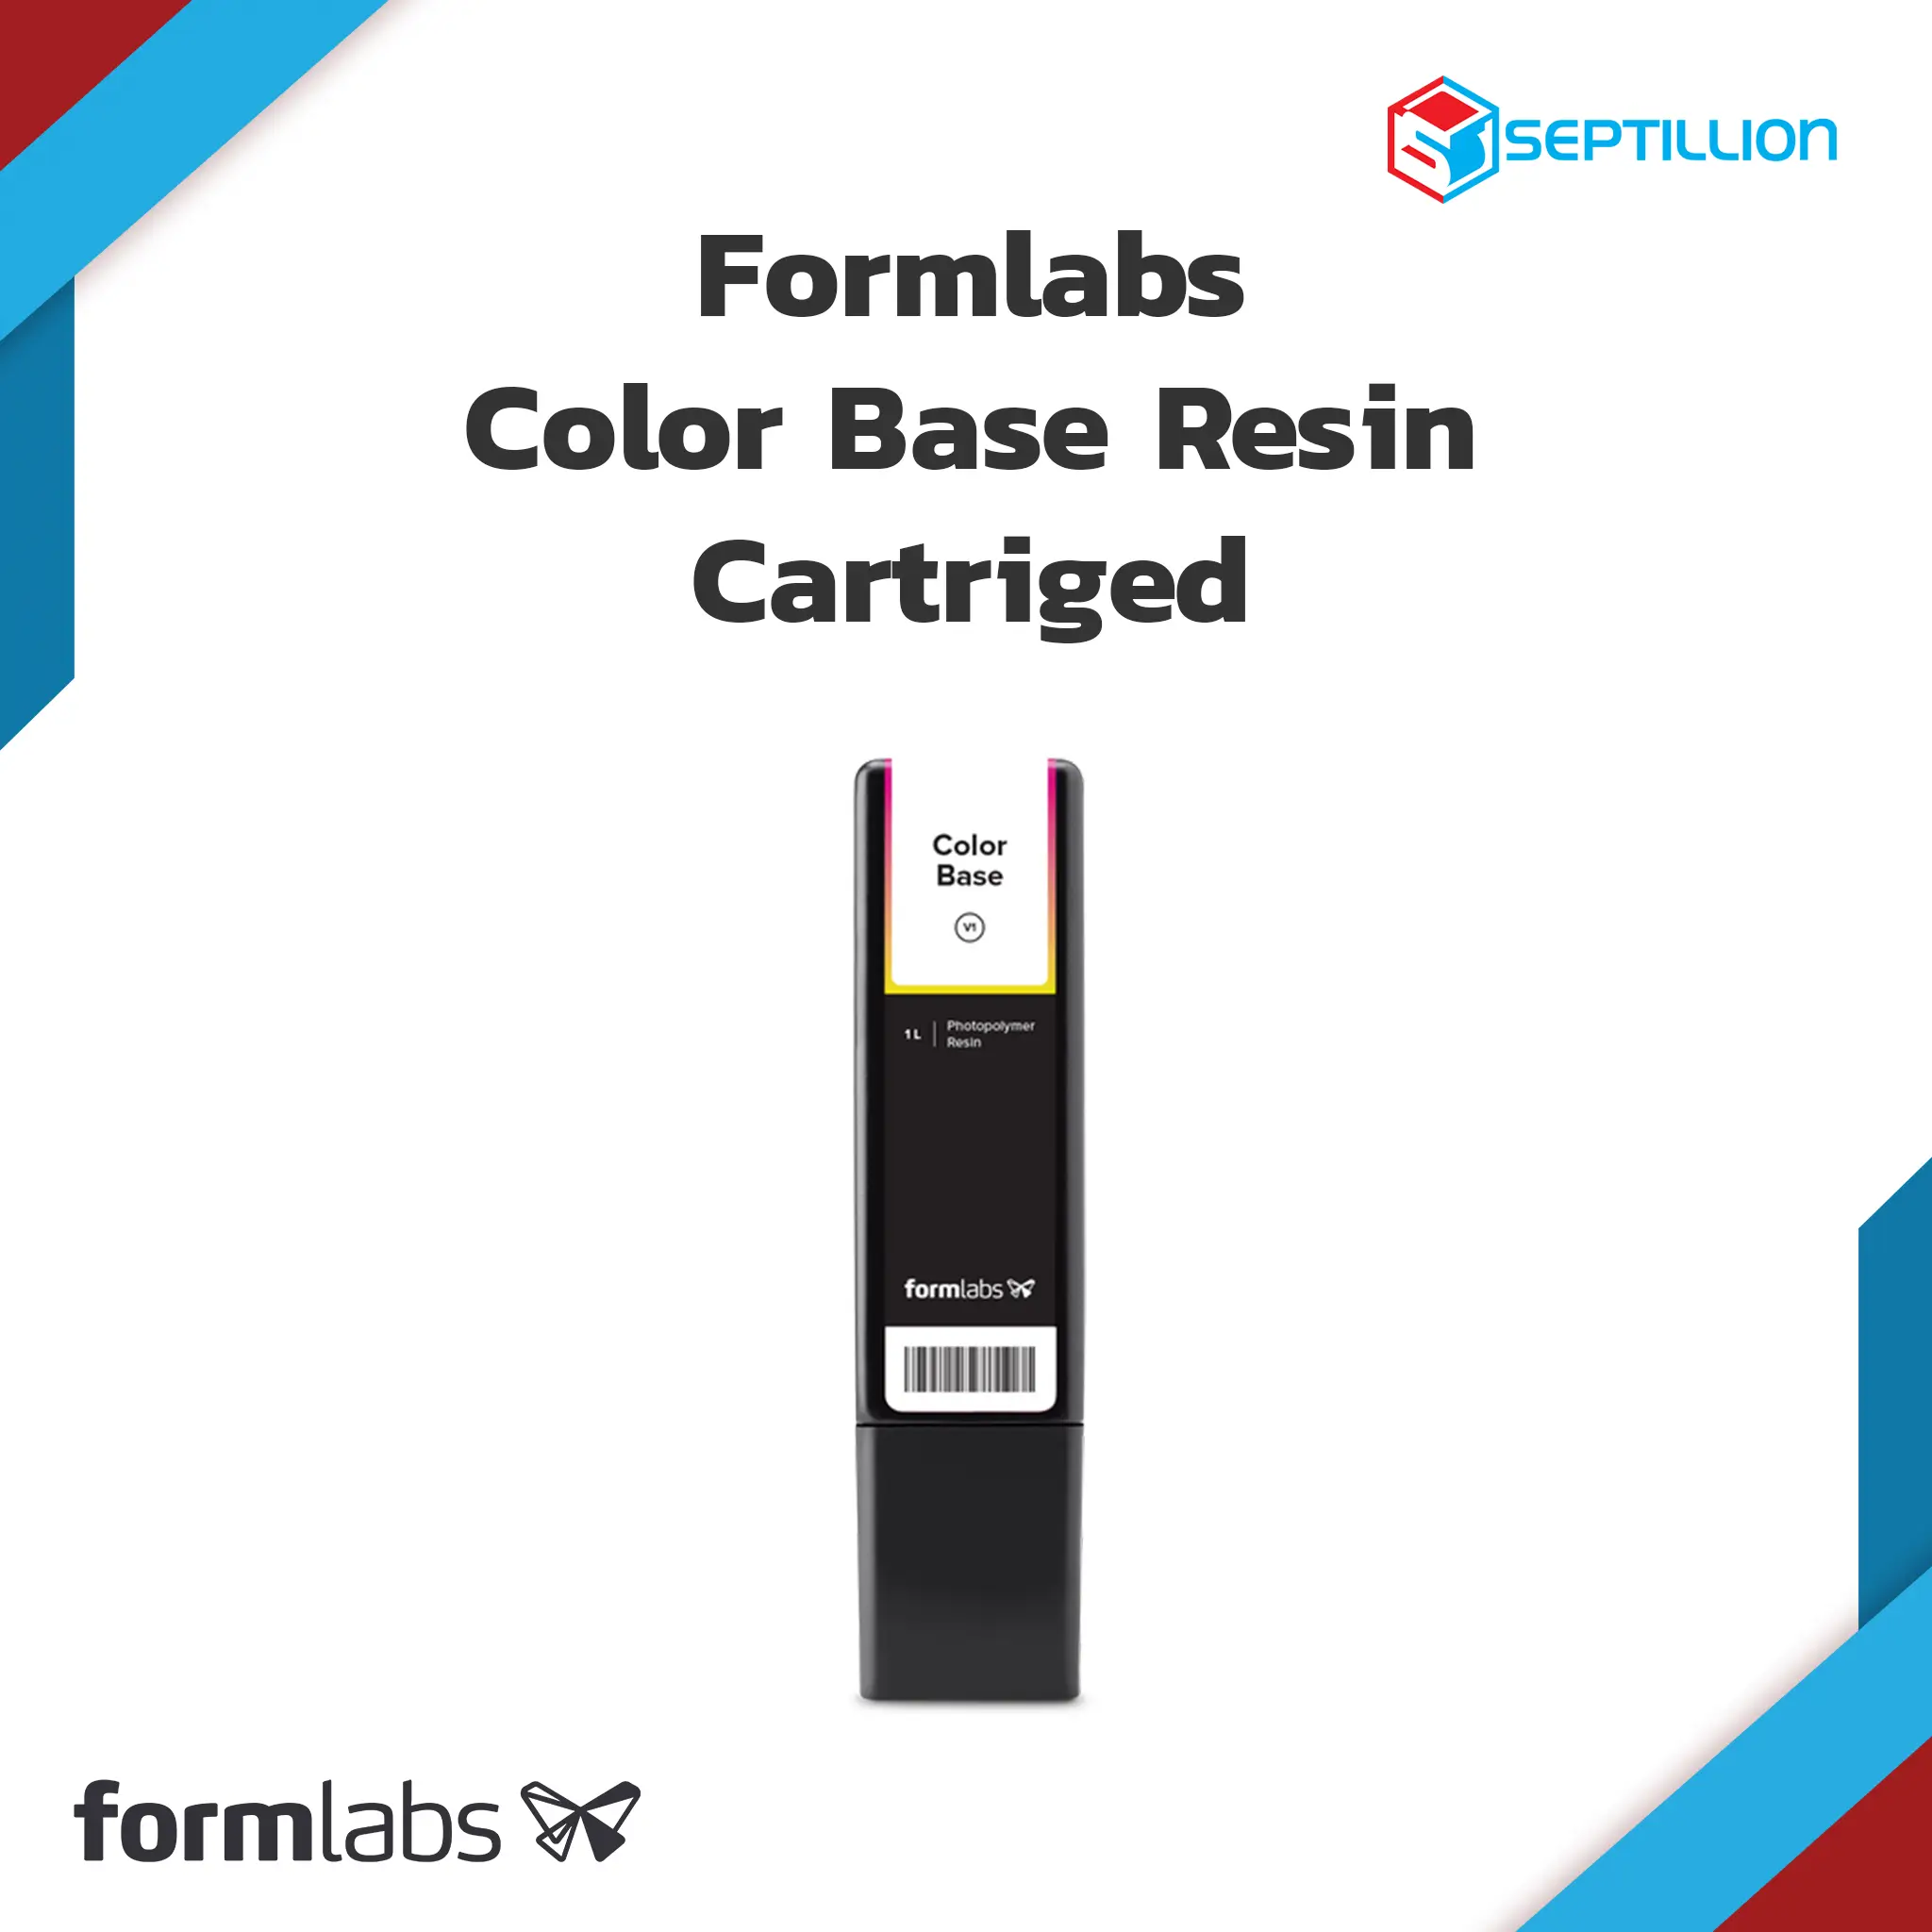 https://www.septillion.co.th/wp-content/uploads/Formlabs_ColorBase_Resin_Cartriged_on_web-1.webp